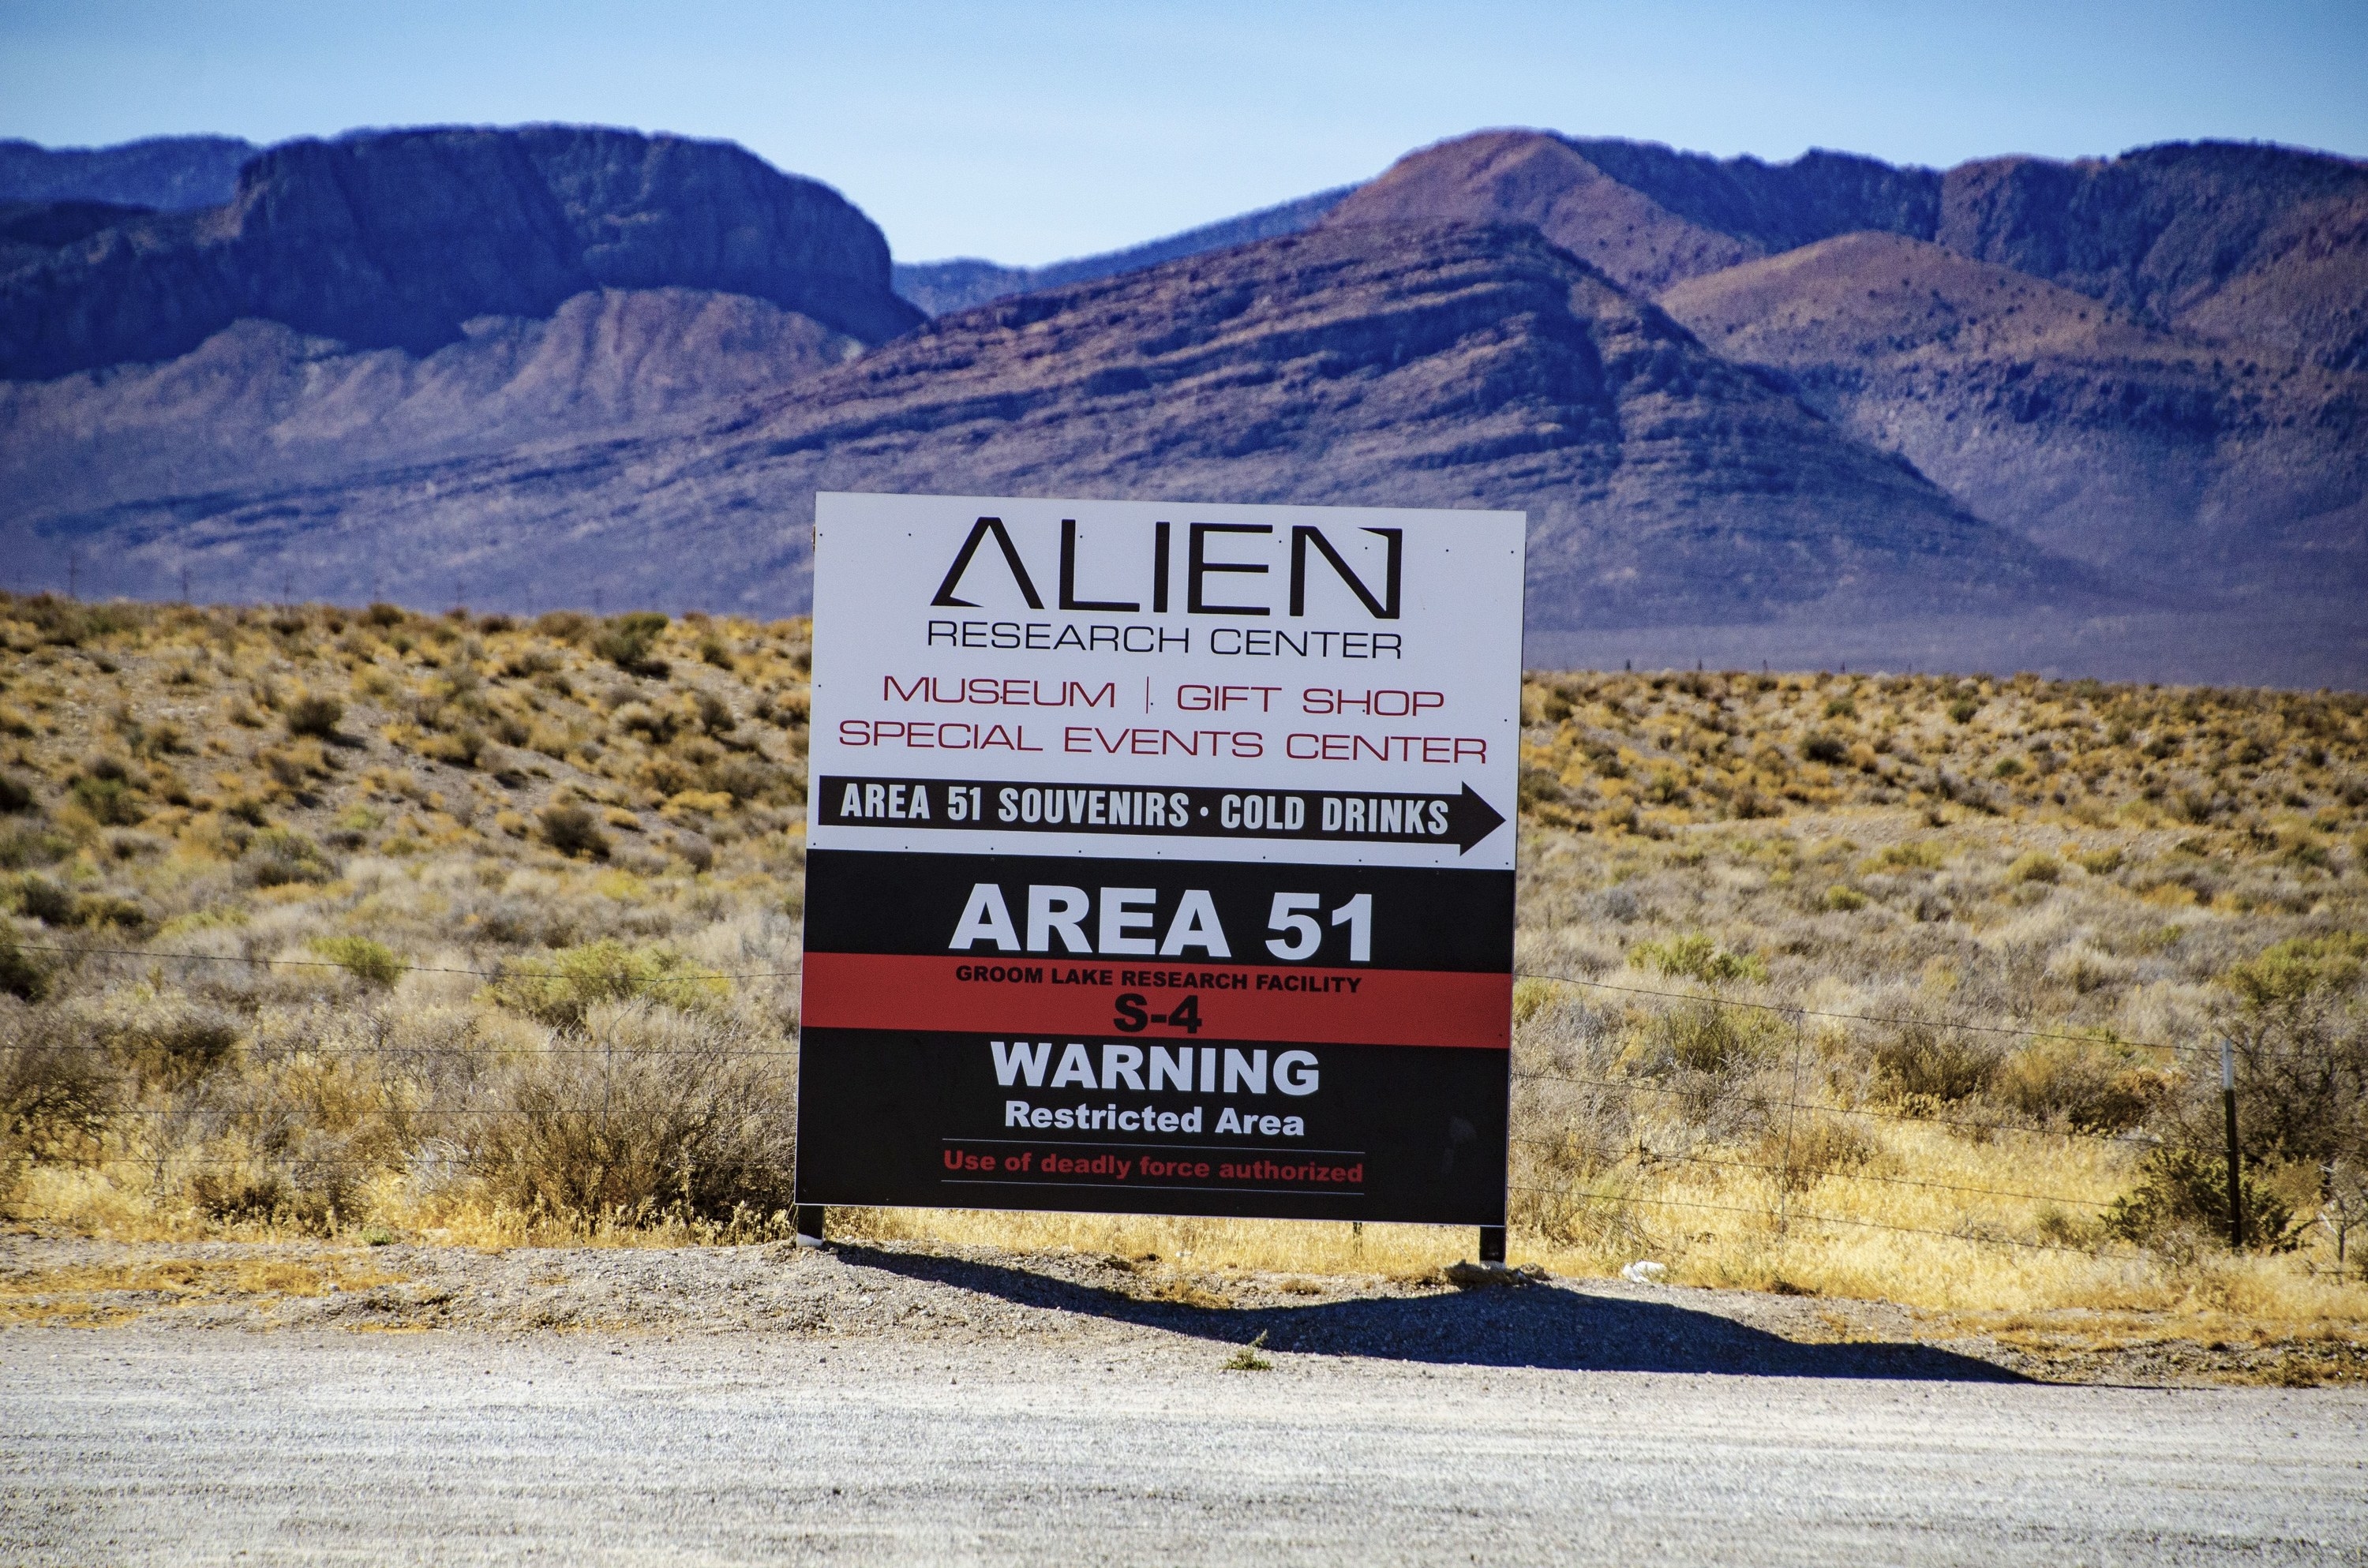 A sign for Area 51